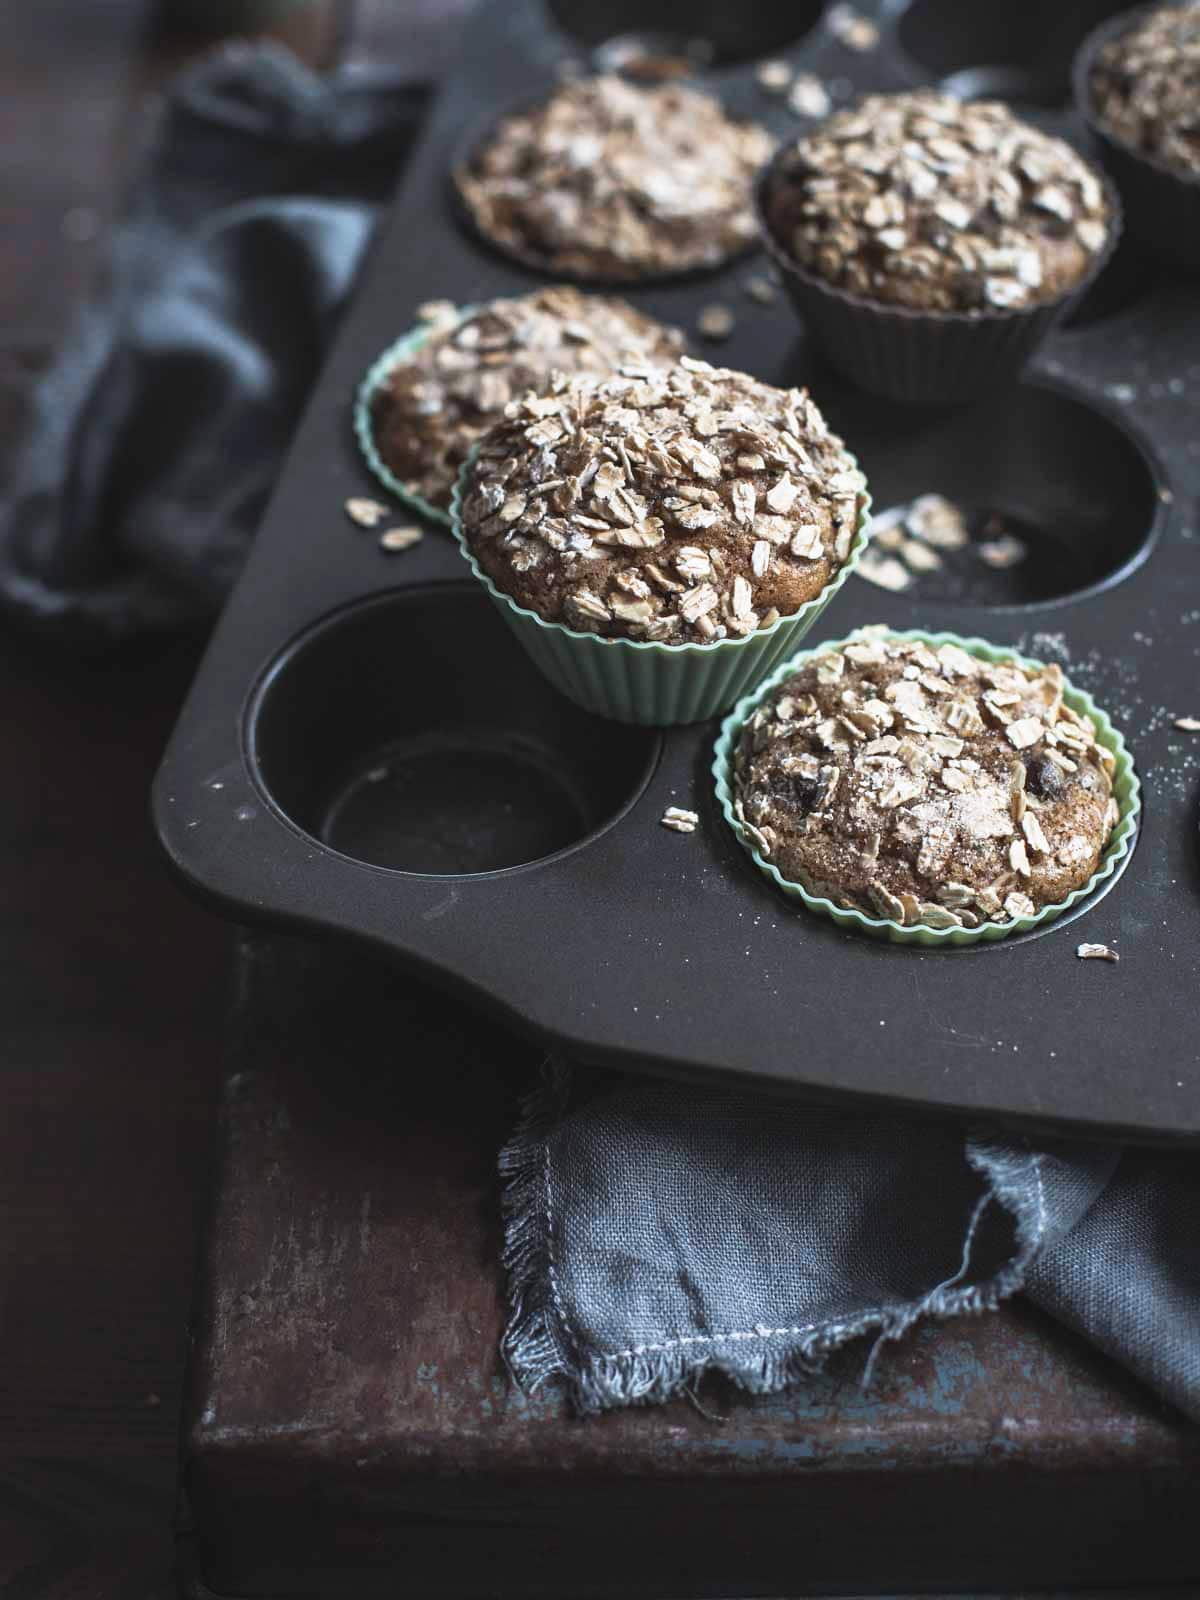 Baked muffins with oatmeal on a baking tray.